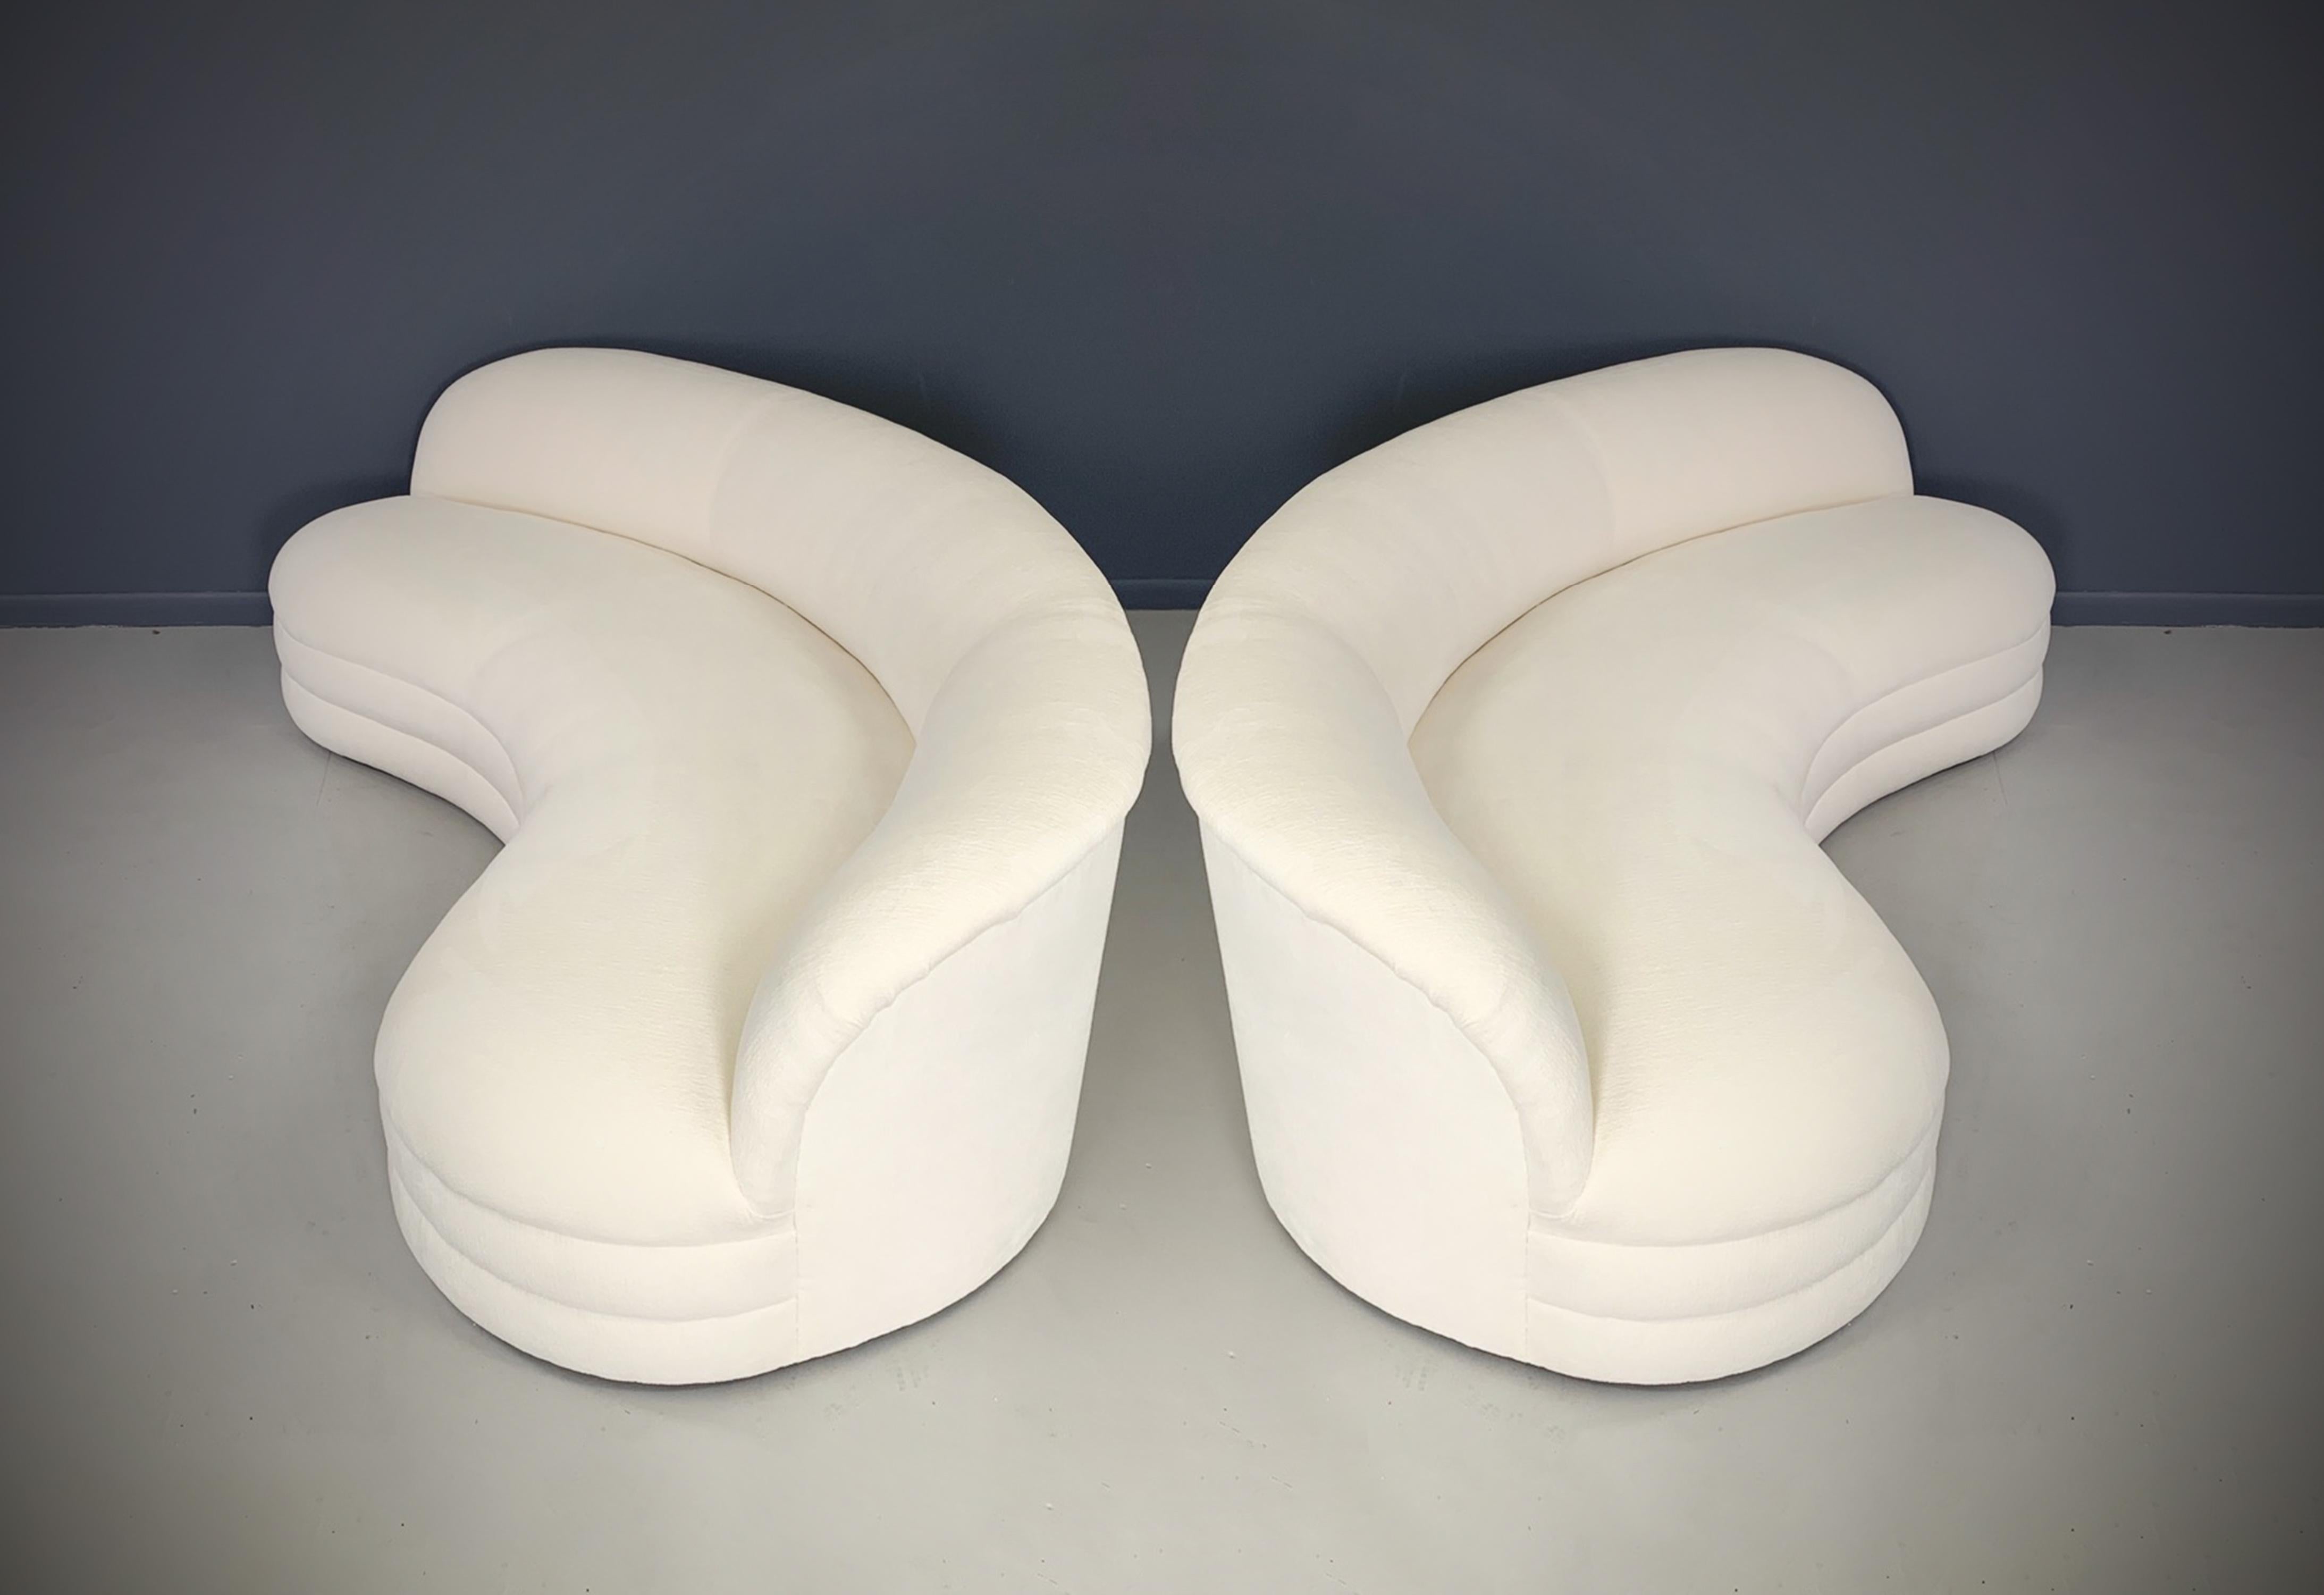 A pair of kidney-shaped sofas feature a nice sculptural modern design, with a curved arched back. These sofas are newly produced and have been handcrafted with a solid hardwood frame, manufactured in the United States with an 8 to 10 week